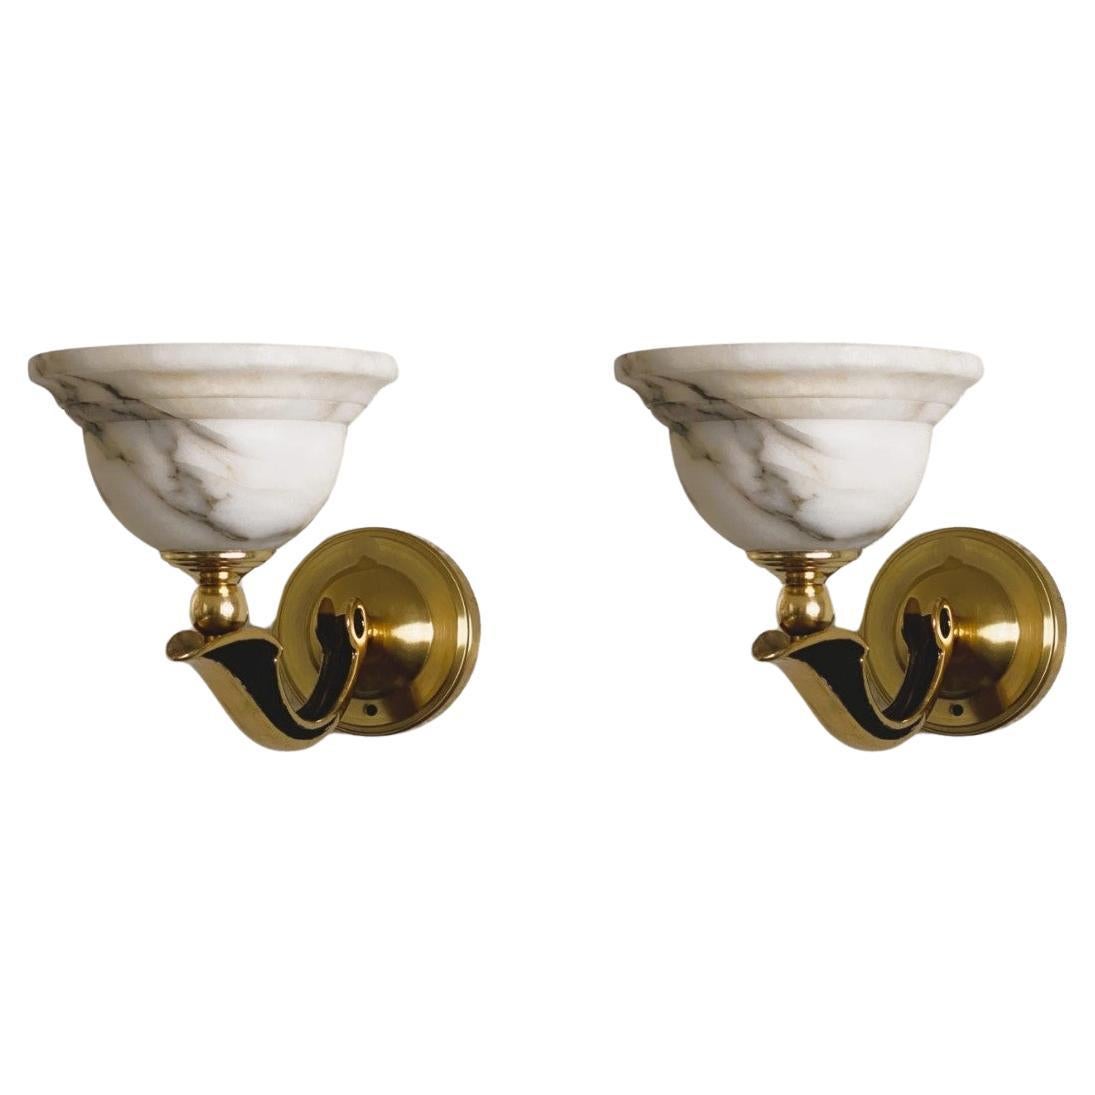 Pair of French Art Deco Alabaster Brass Wall Sconces, 1930s For Sale